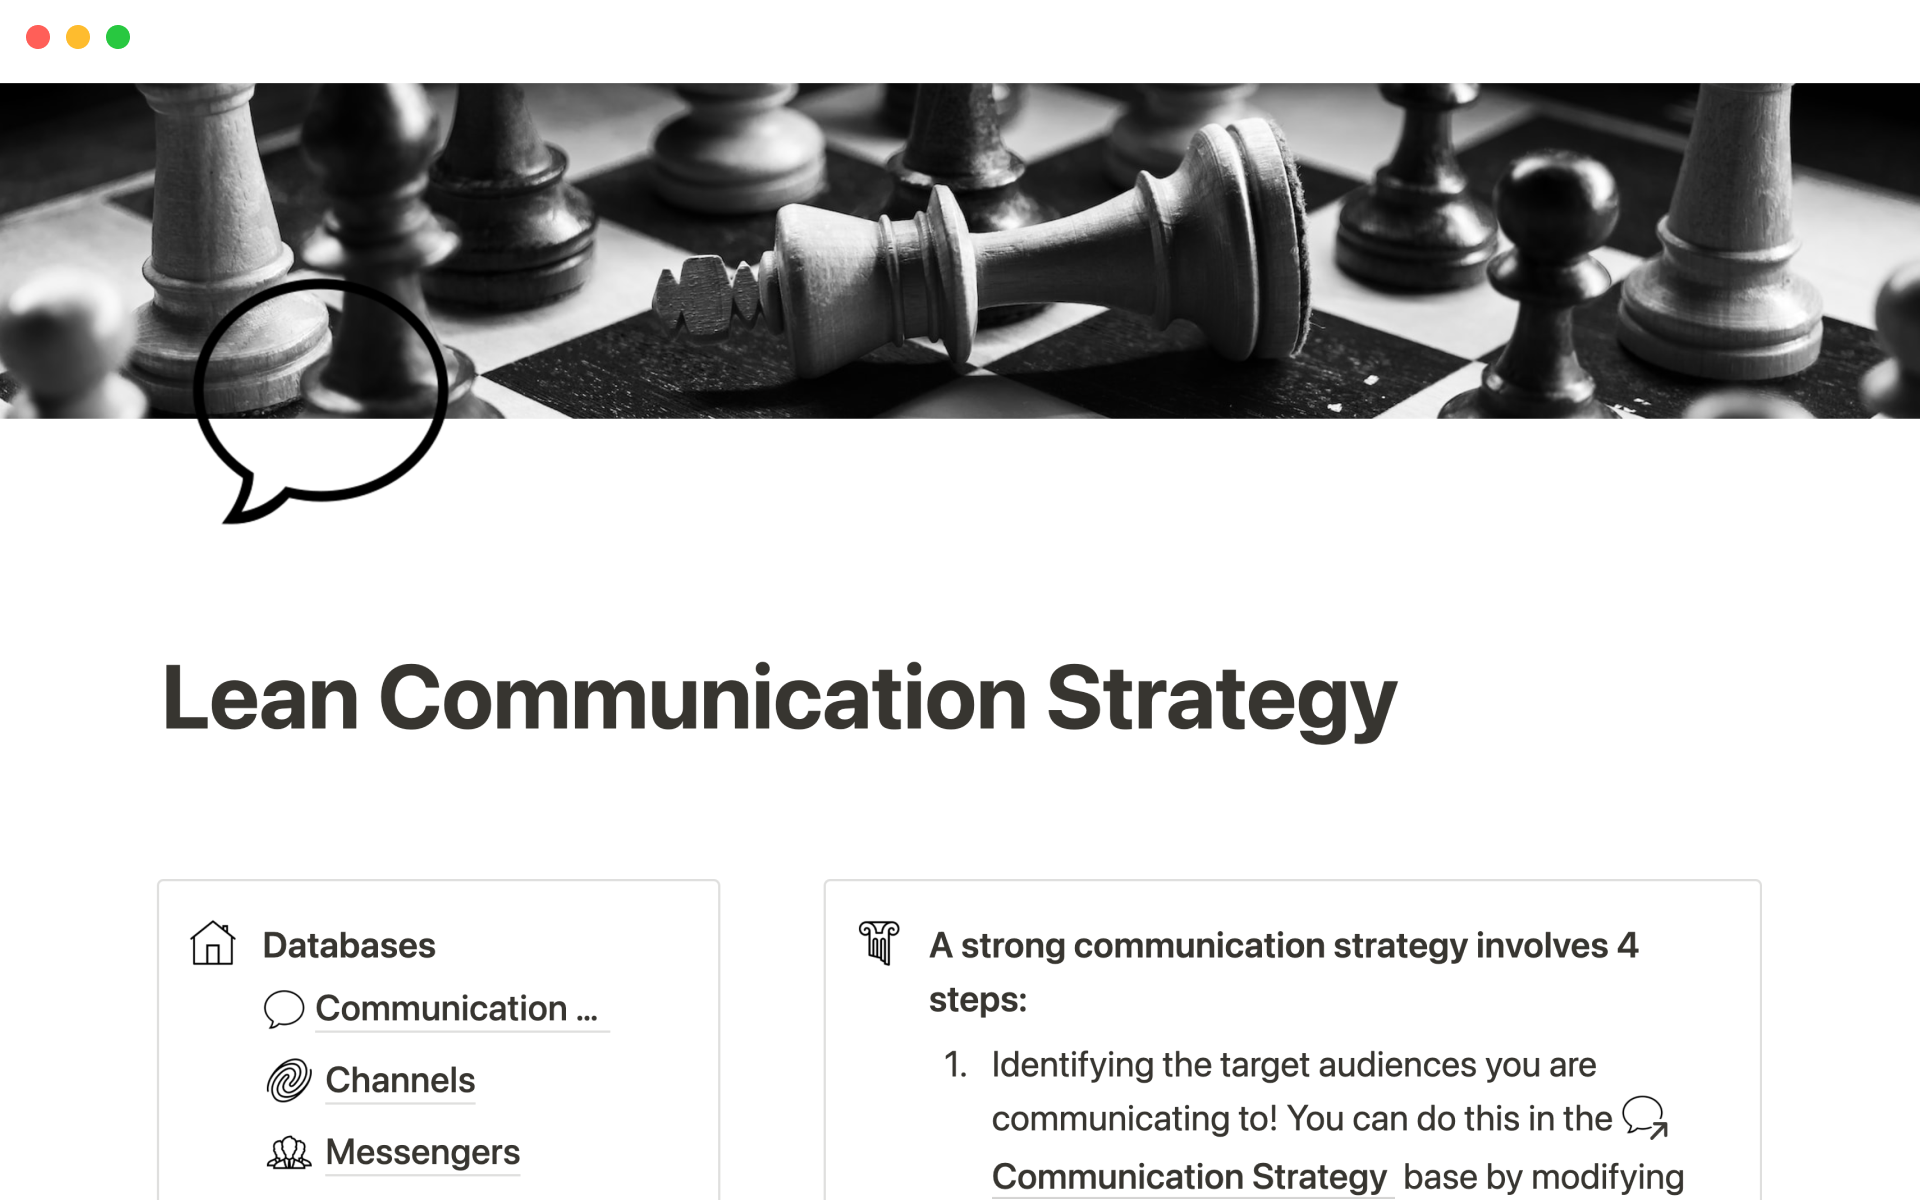 Build a lean communication strategy and plan messages for each audience, channel and messenger.